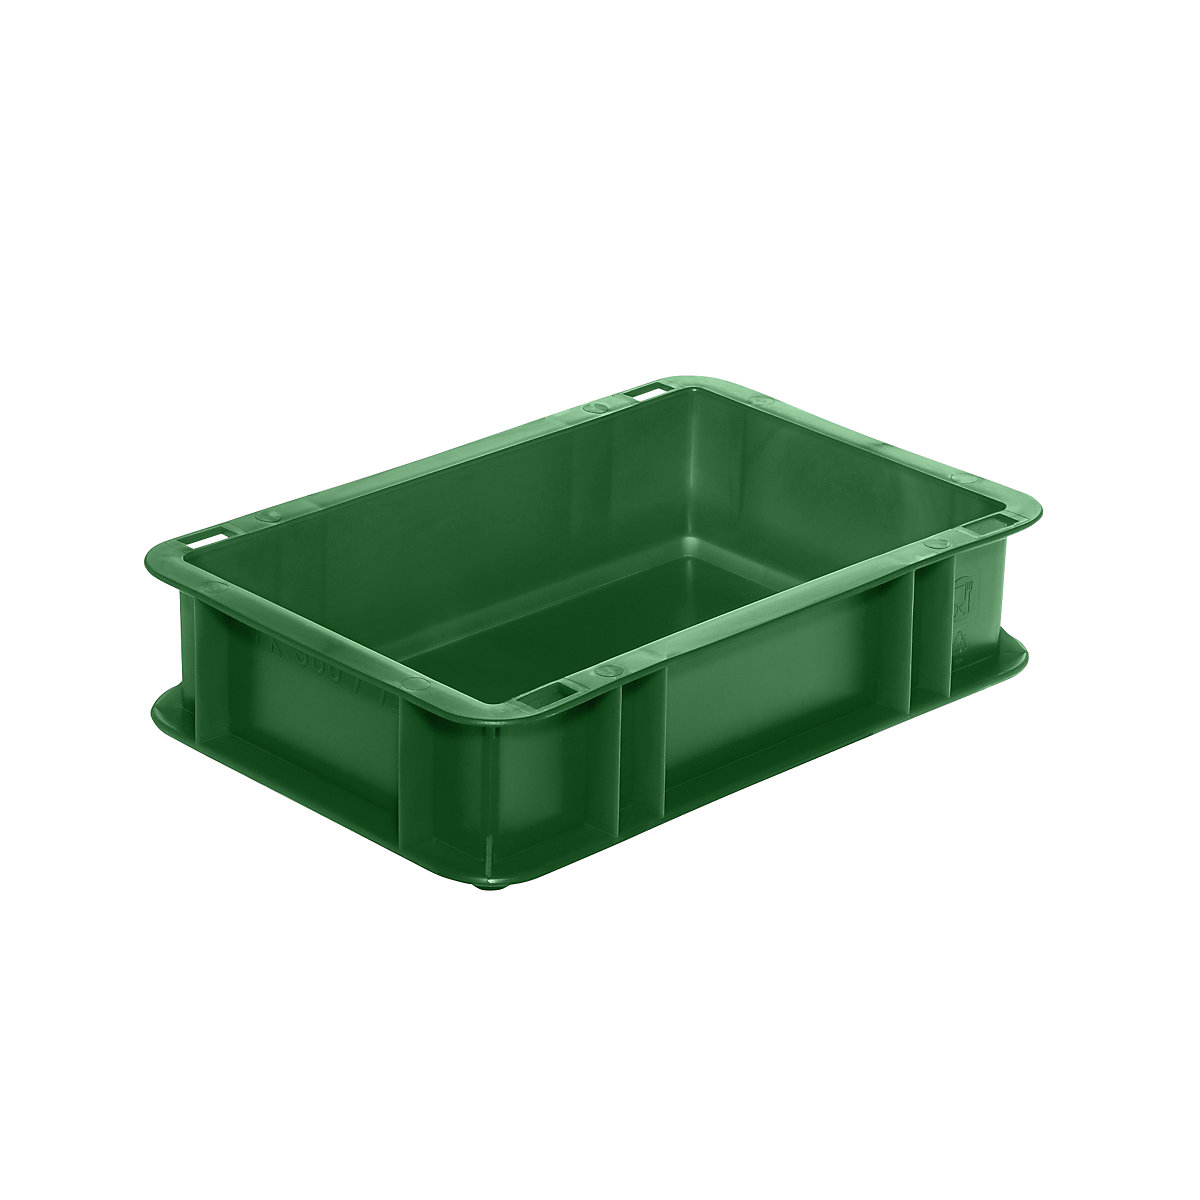 Euro stacking container, closed walls and base, LxWxH 300 x 200 x 75 mm, green, pack of 5